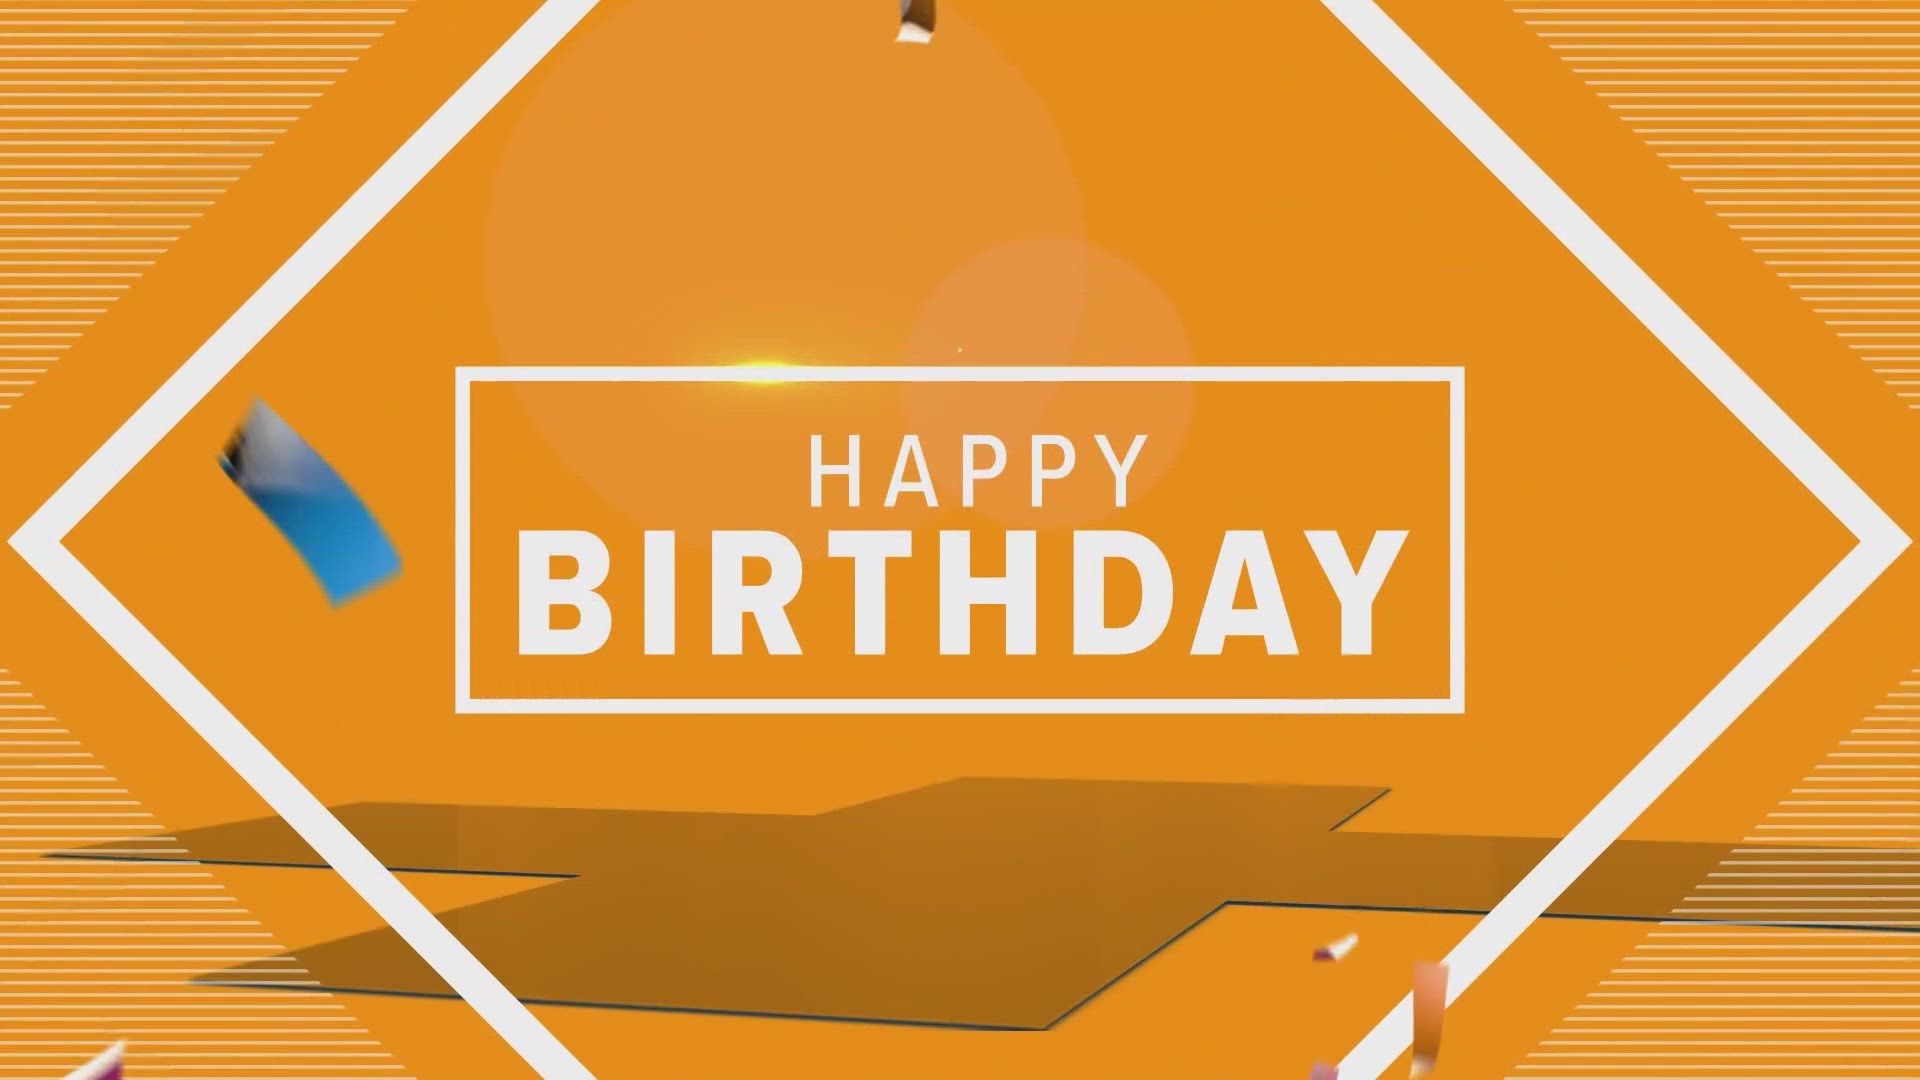 Texas Today is wishing everyone born on October 12, a very happy birthday!